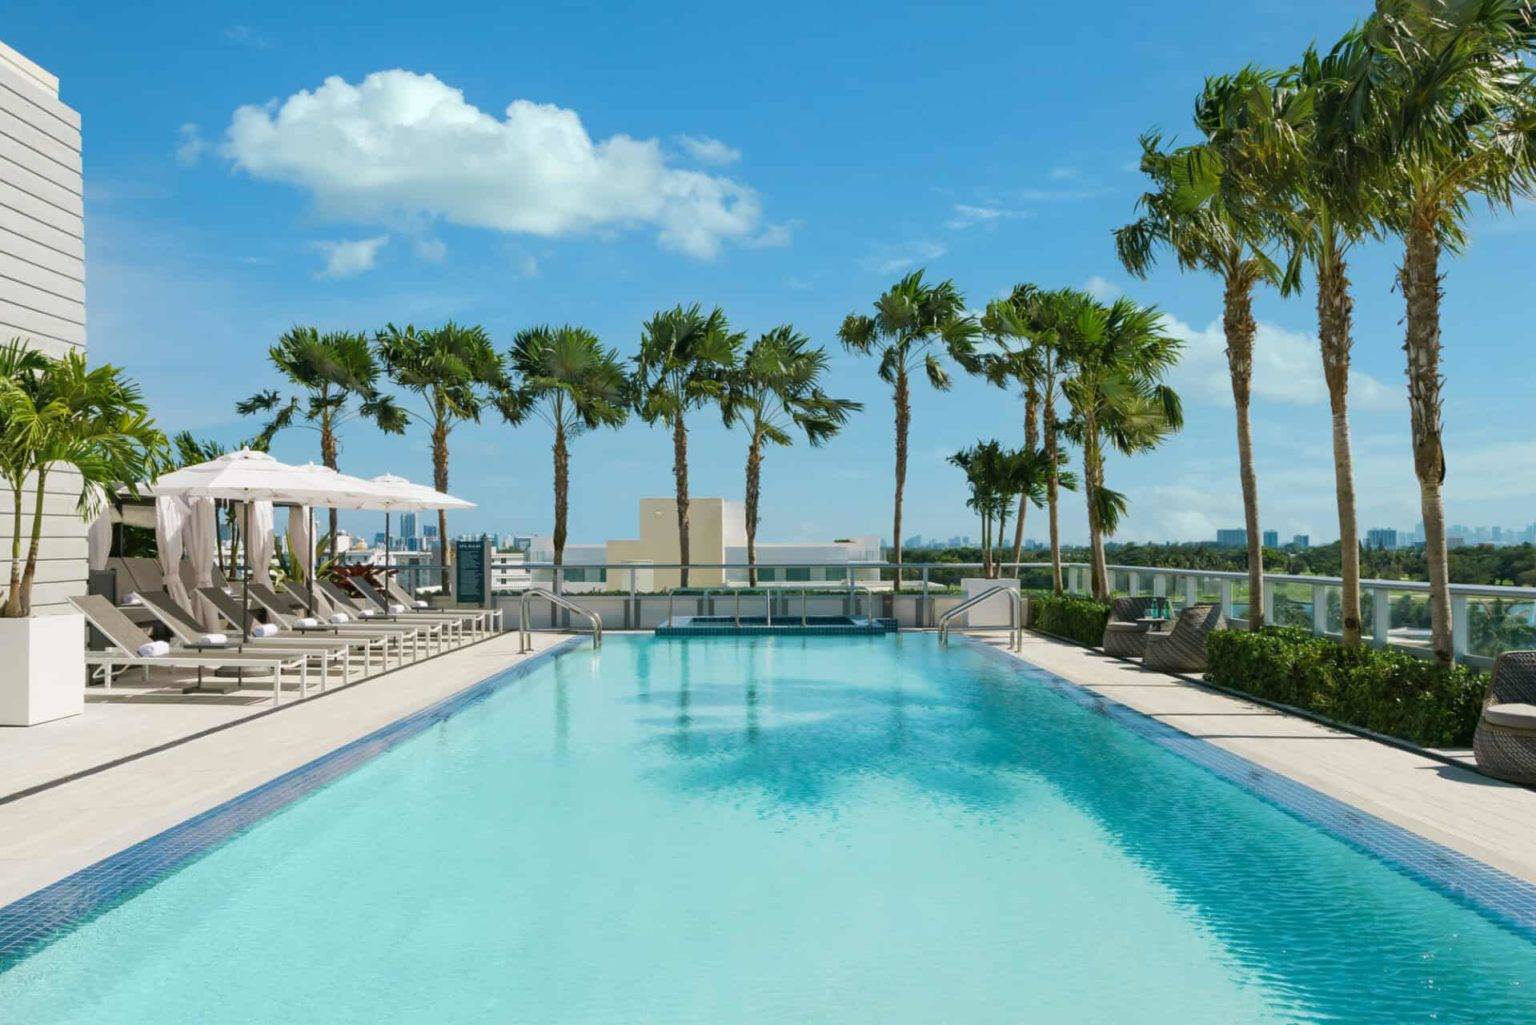 The Altair Hotel pool overlooking the Miami skyline